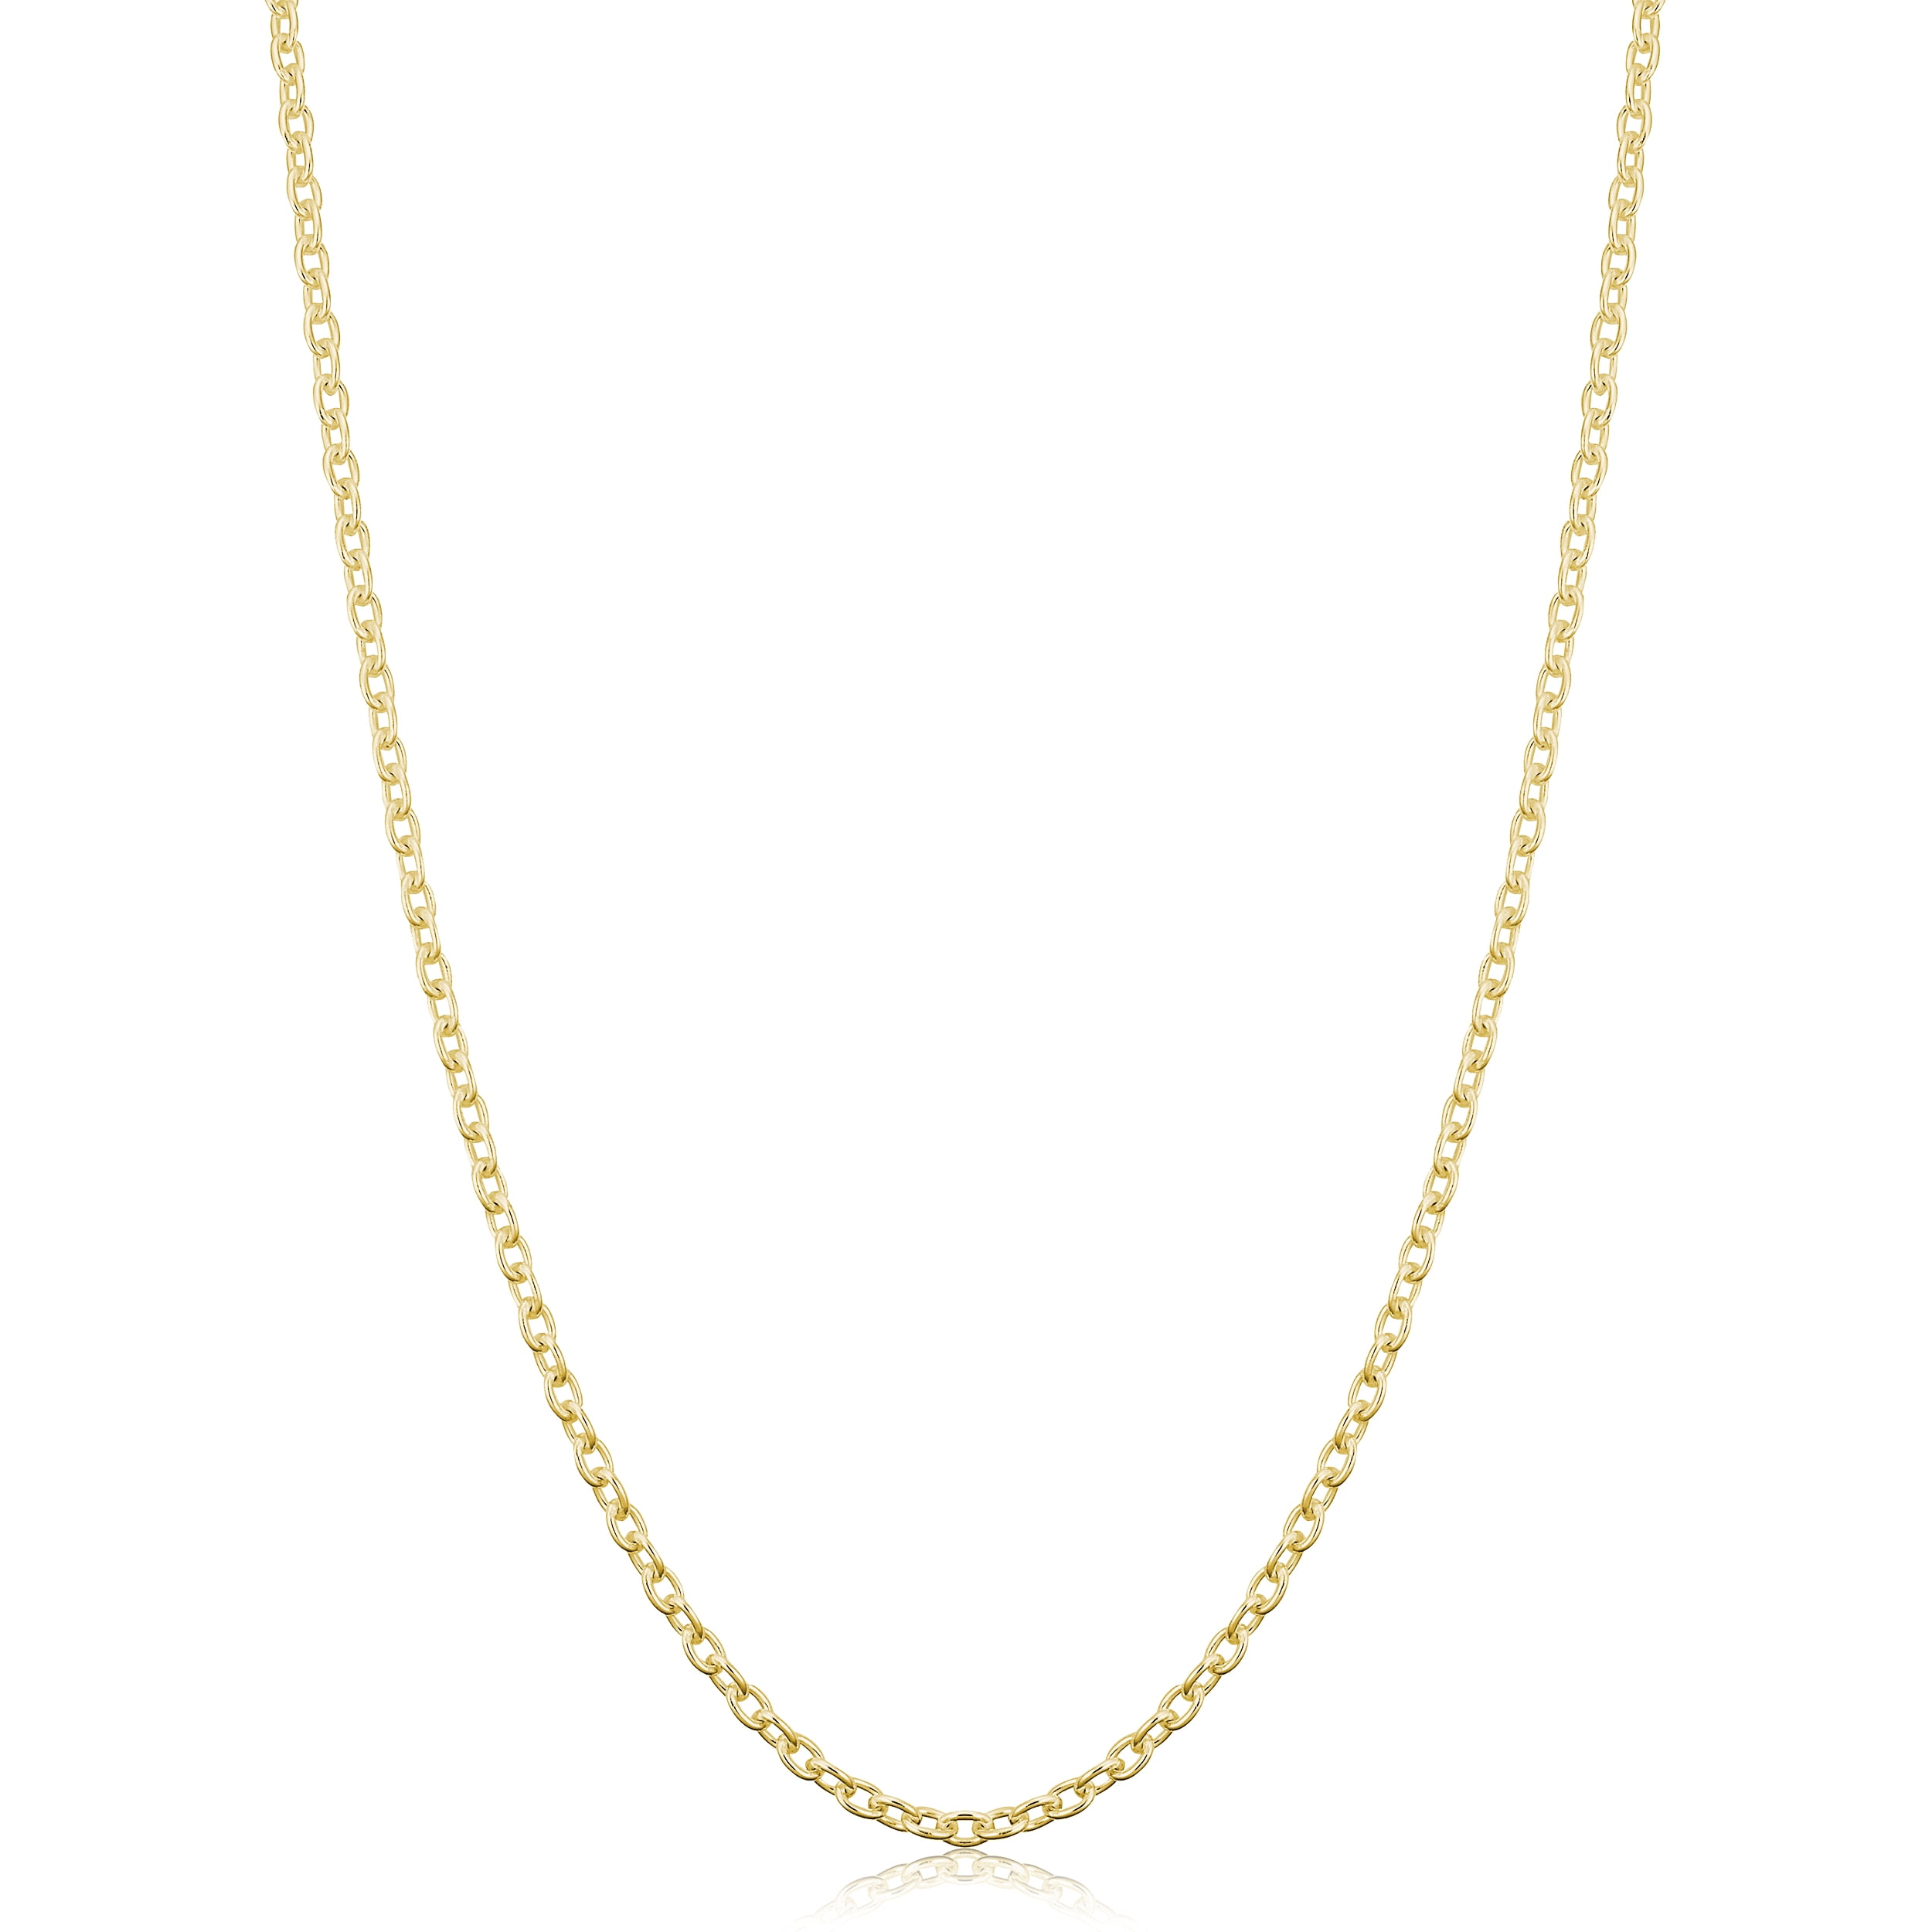 Yellow Gold Over Sterling Silver Cable Chain Necklace (2.1 mm, 30